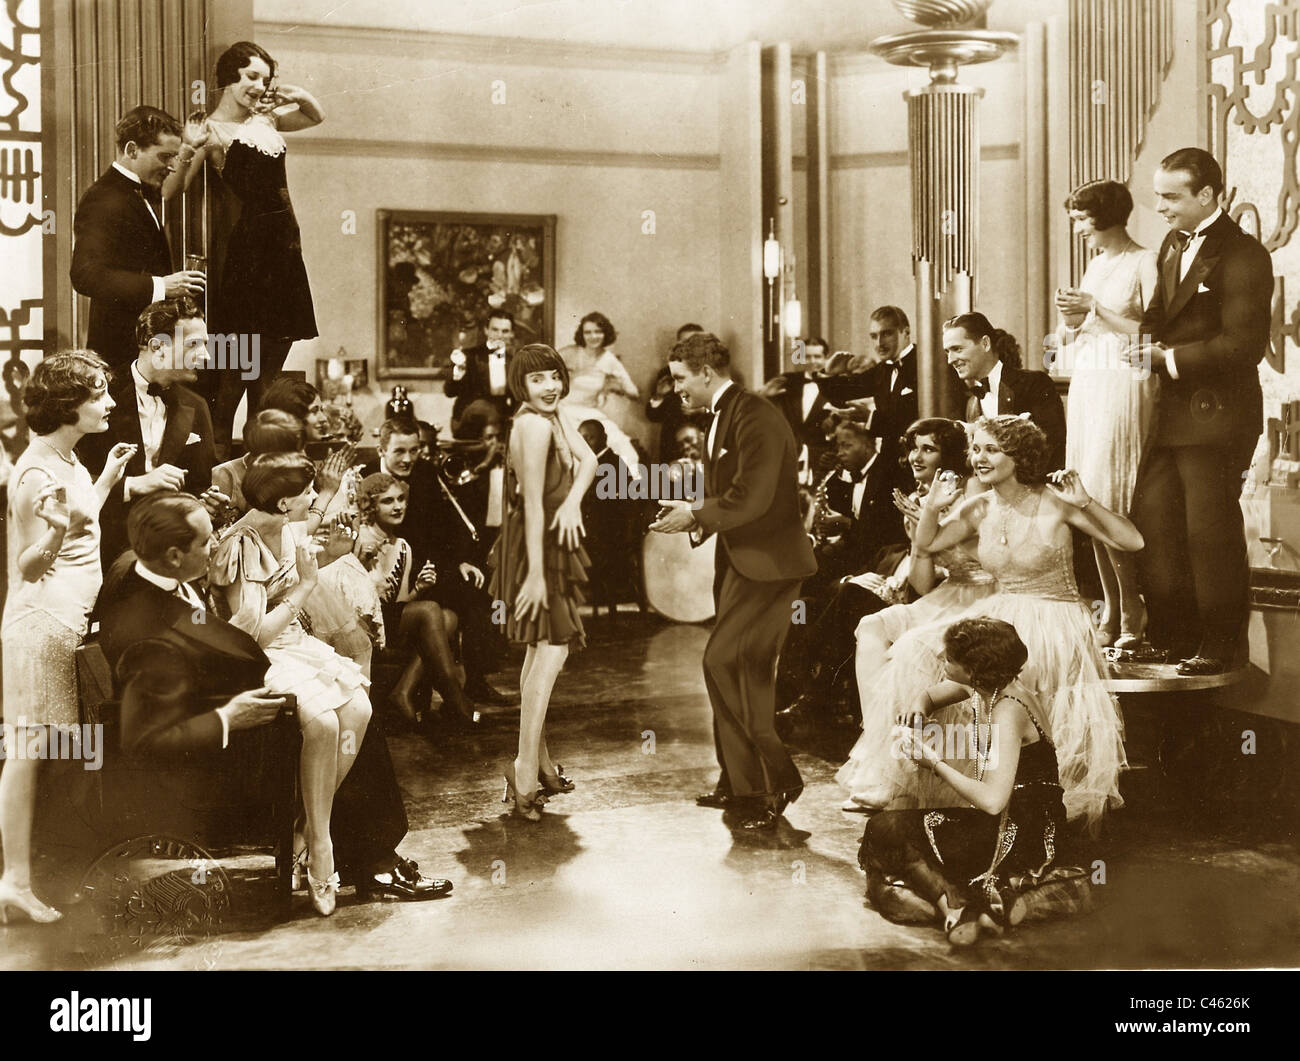 Charleston dancers at a dance event in the 20's Stock Photo